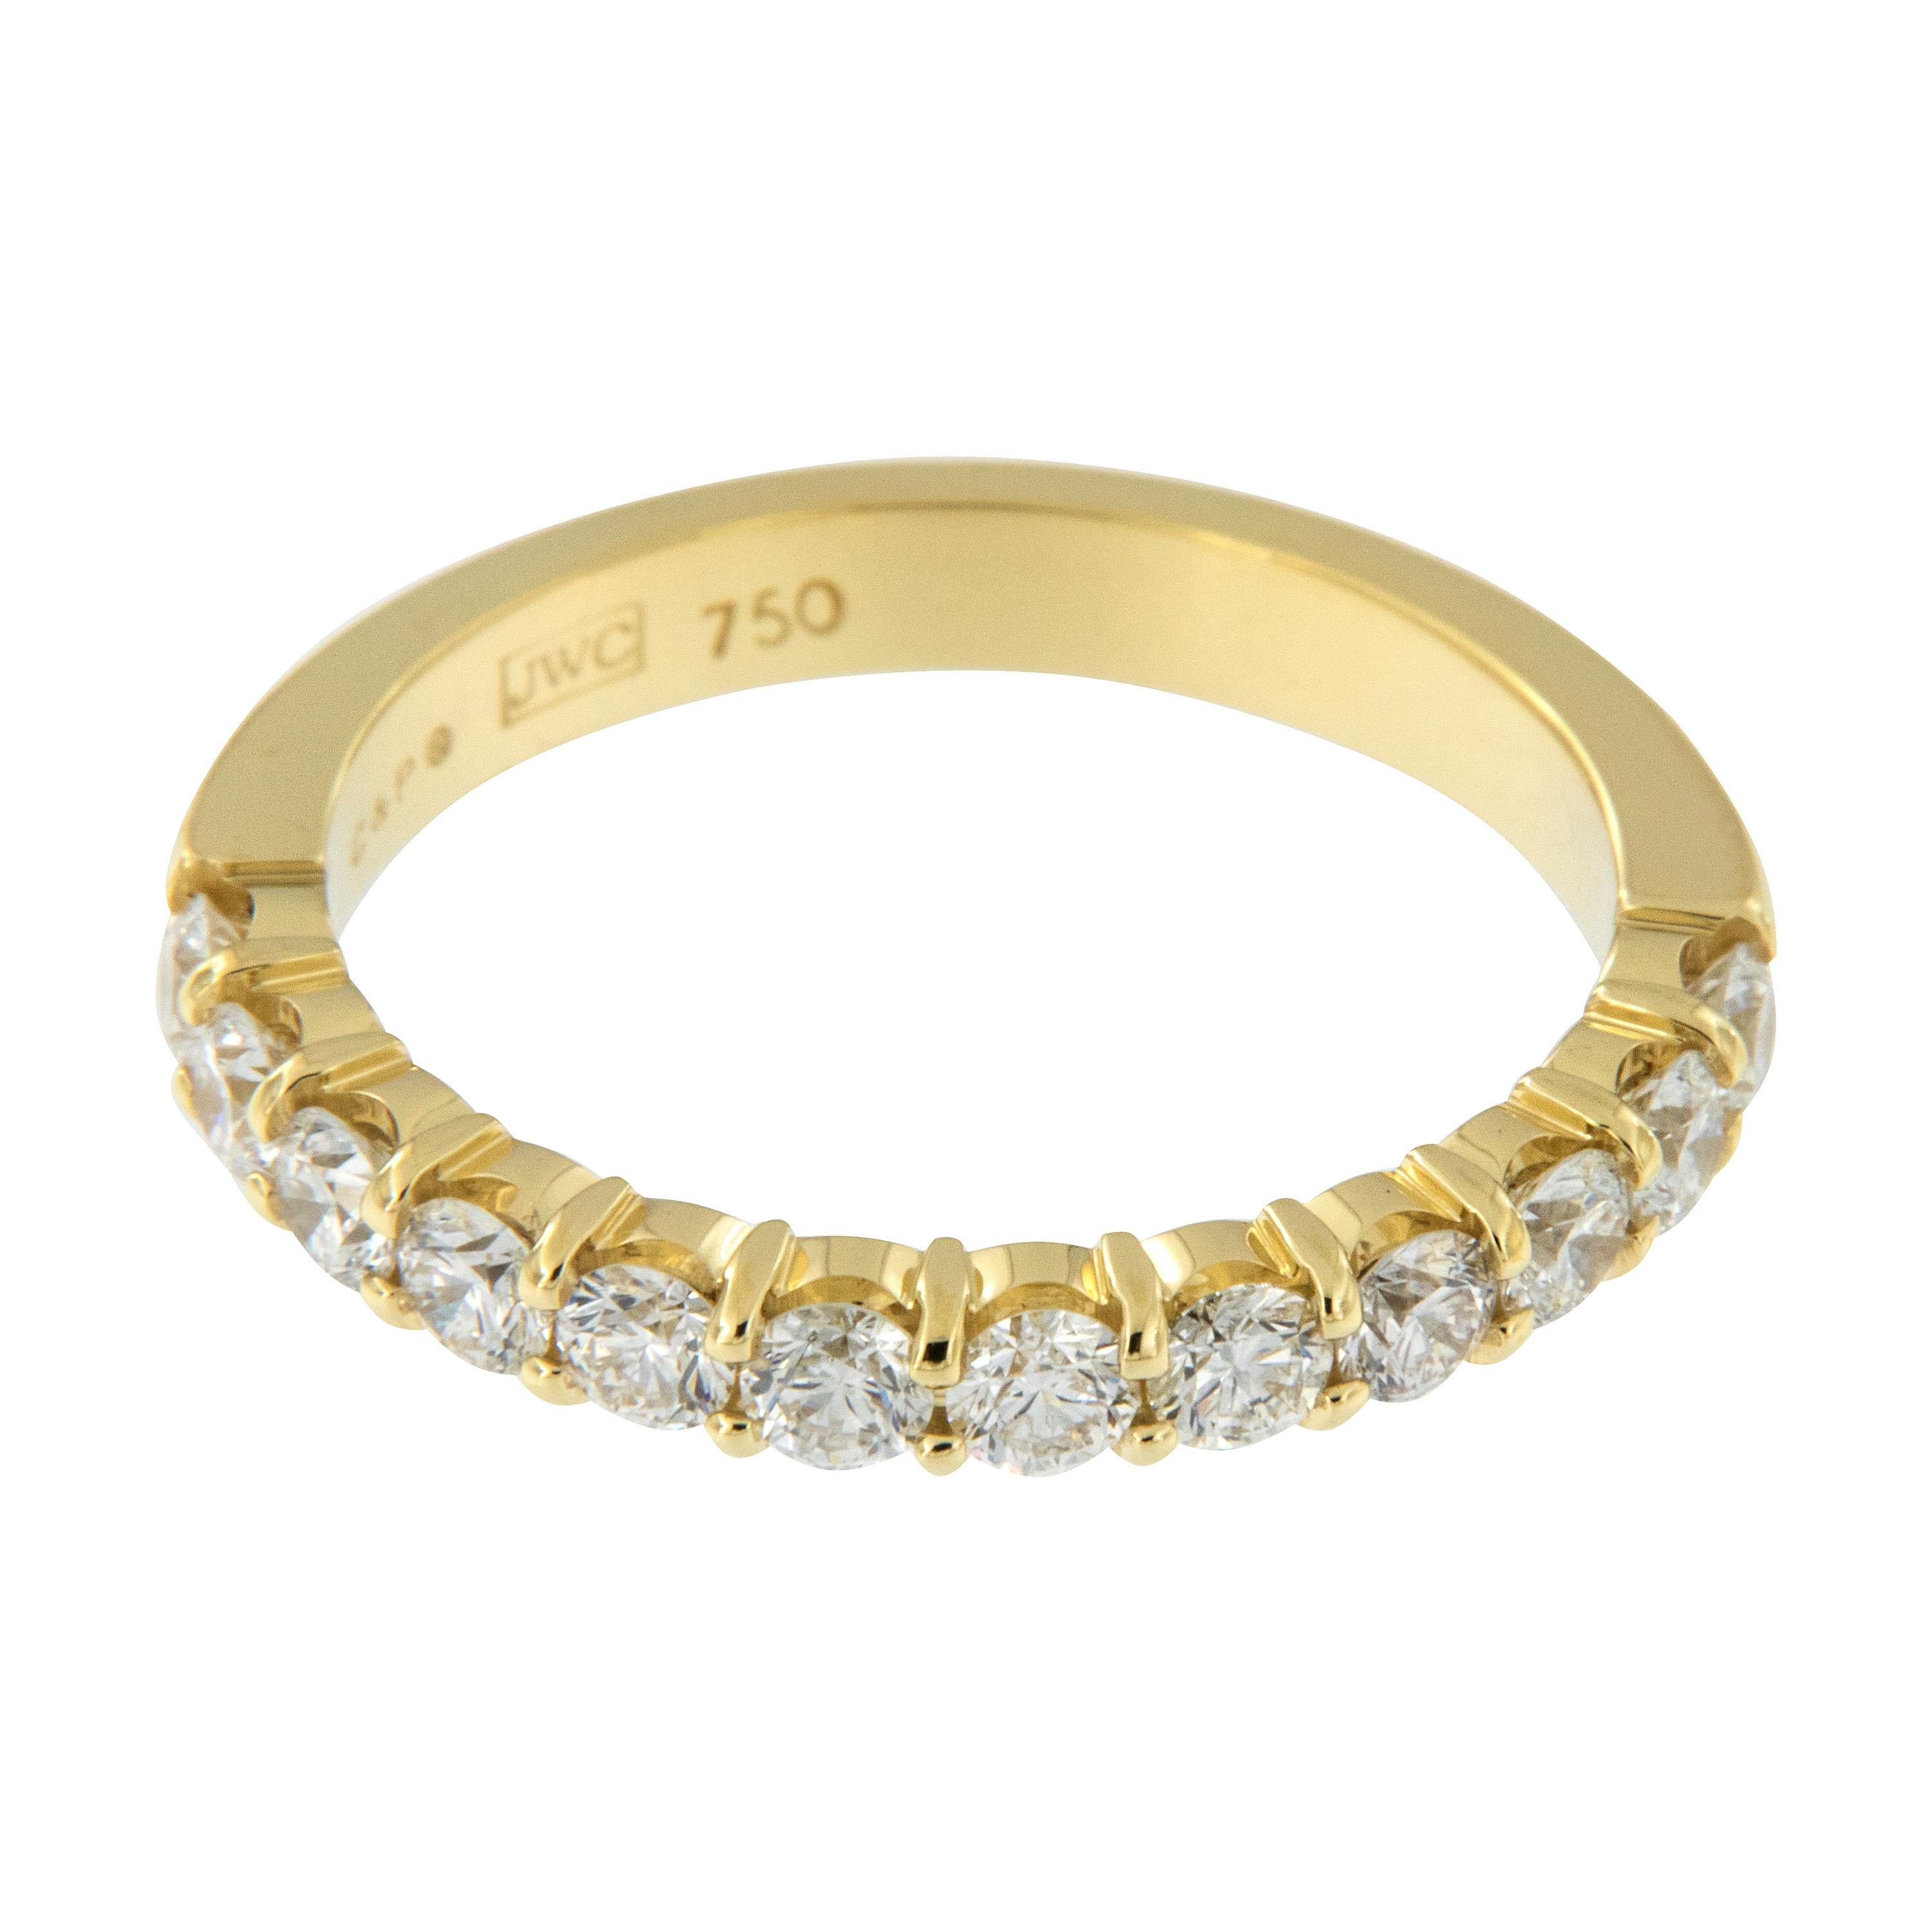 What could be a more perfect gift to commemorate your anniversary than this timeless diamond band? Rich 18 karat yellow gold and over 3/4 Cttw of diamonds showcased across the top makes this a statement piece you can wear every day or dress up your